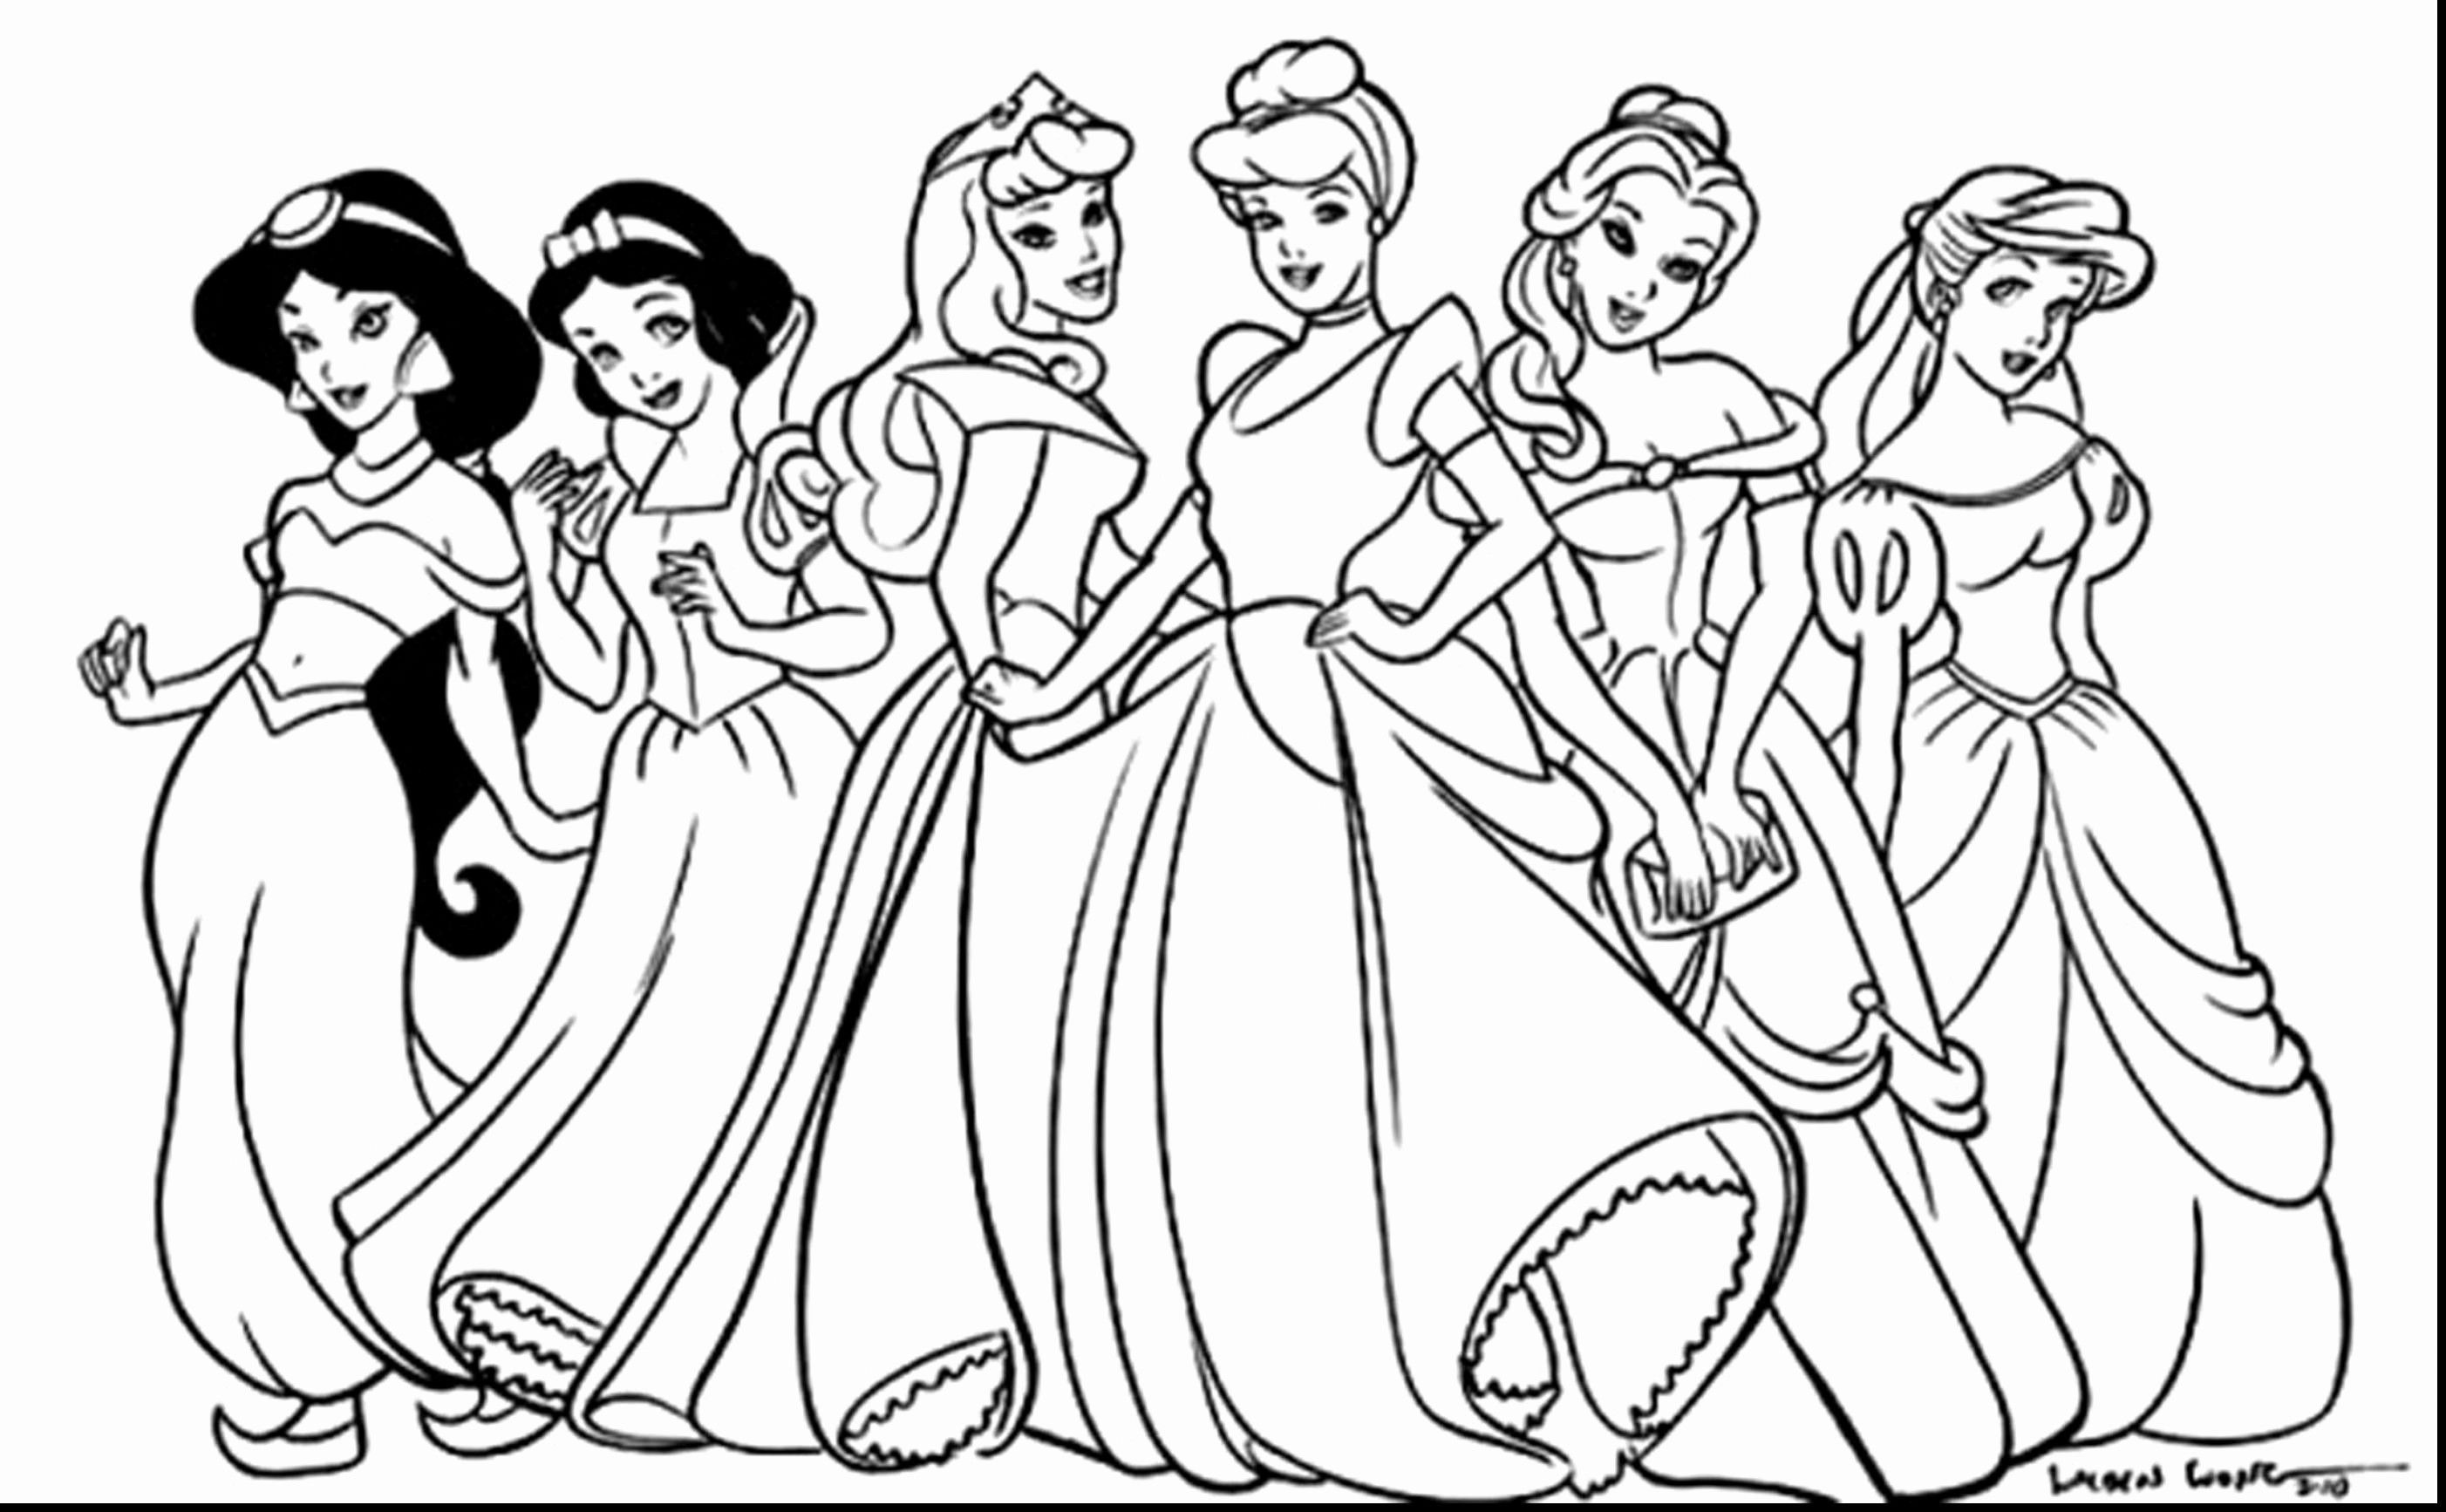 Coloring pages princess pdf â from the thousands of photographs on the internet concerninâ princess coloring pages disney princess colors cartoon coloring pages